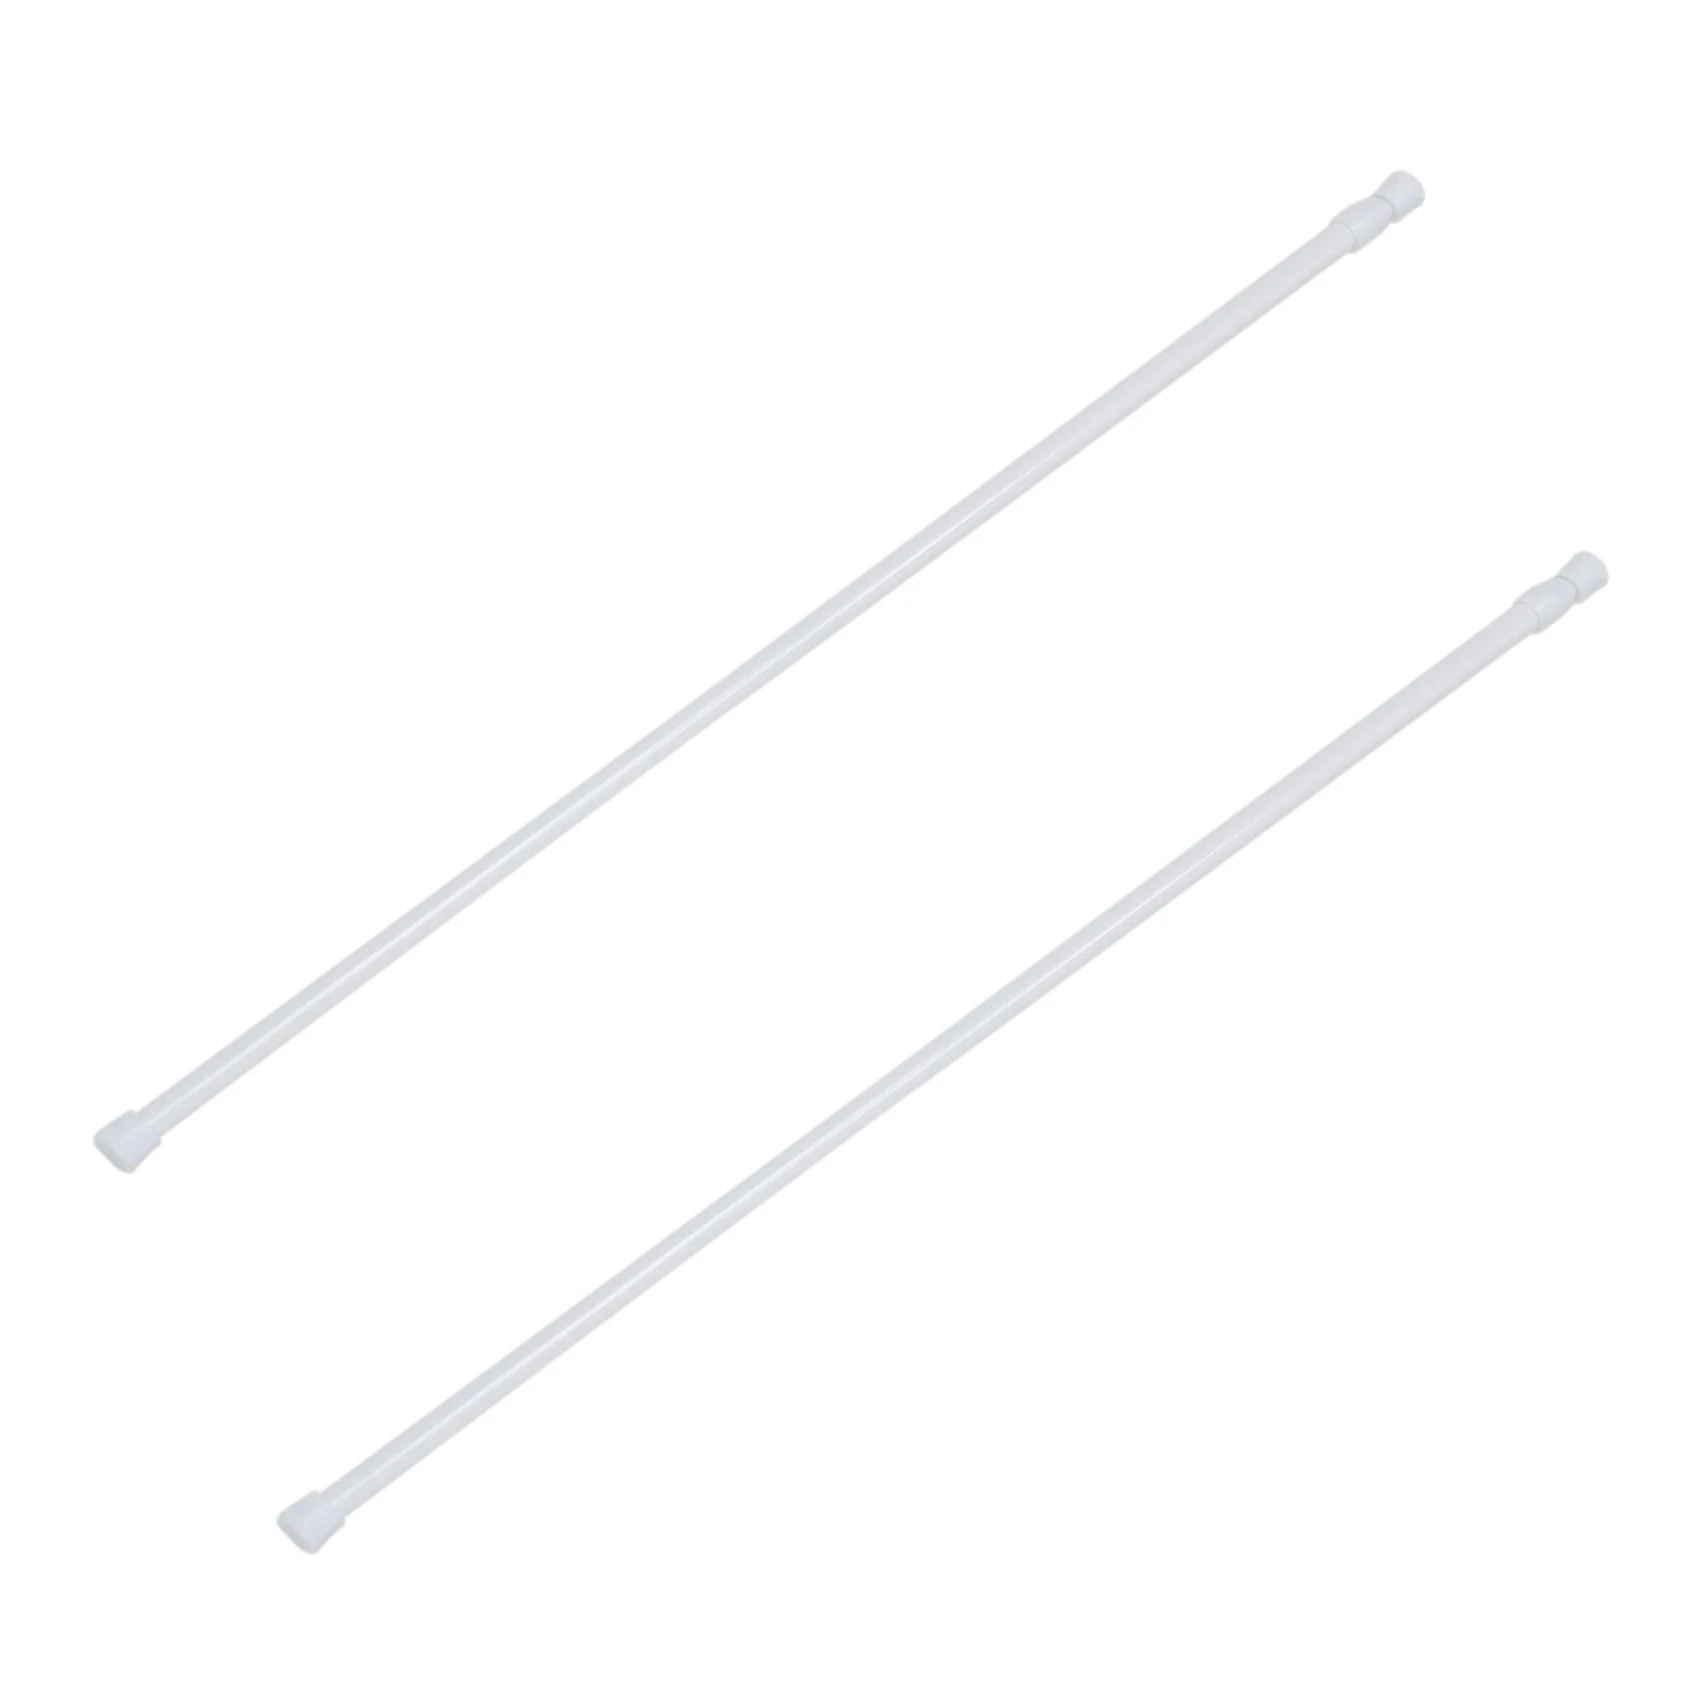 

2X Spring Loaded Extendable Telescopic Net Voile Tension Curtain Rail Pole Rod Rods White 70-120cm